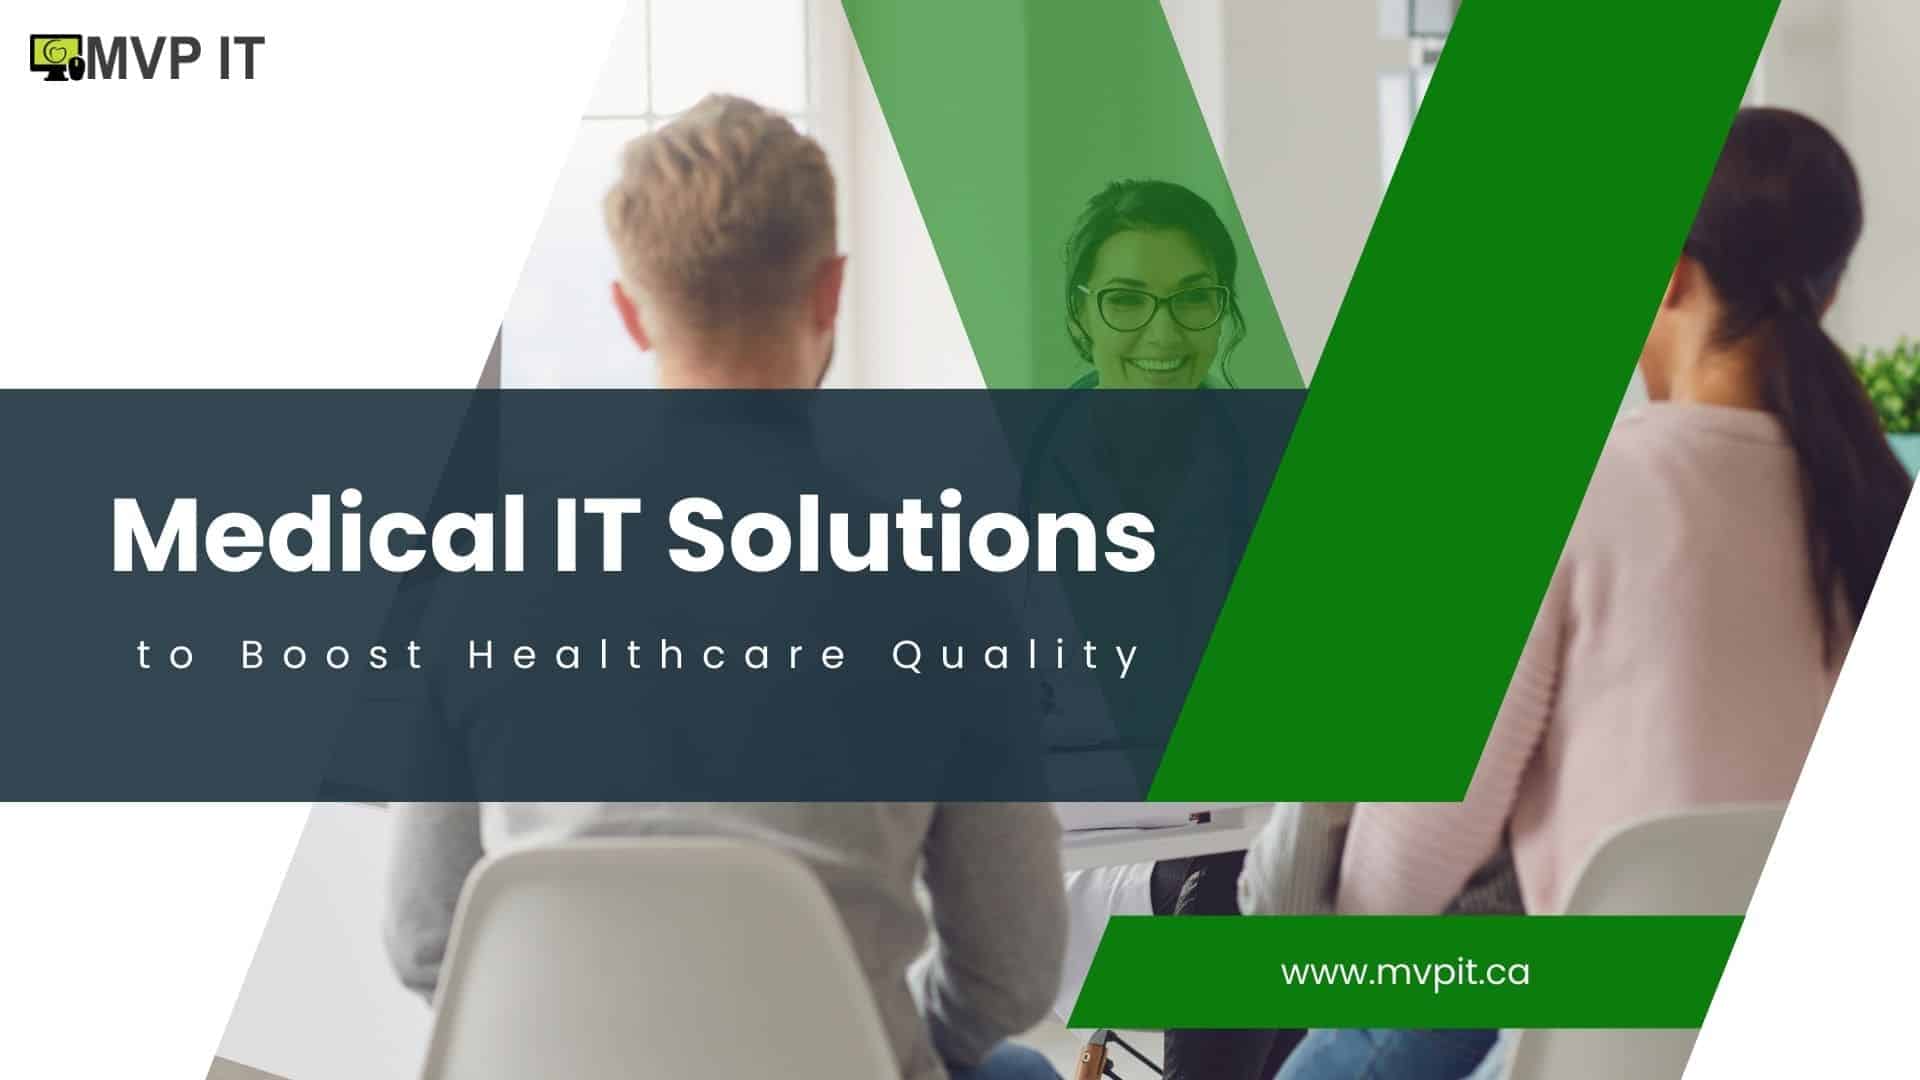 Use Cutting-Edge Medical IT Solutions to Boost Healthcare Quality